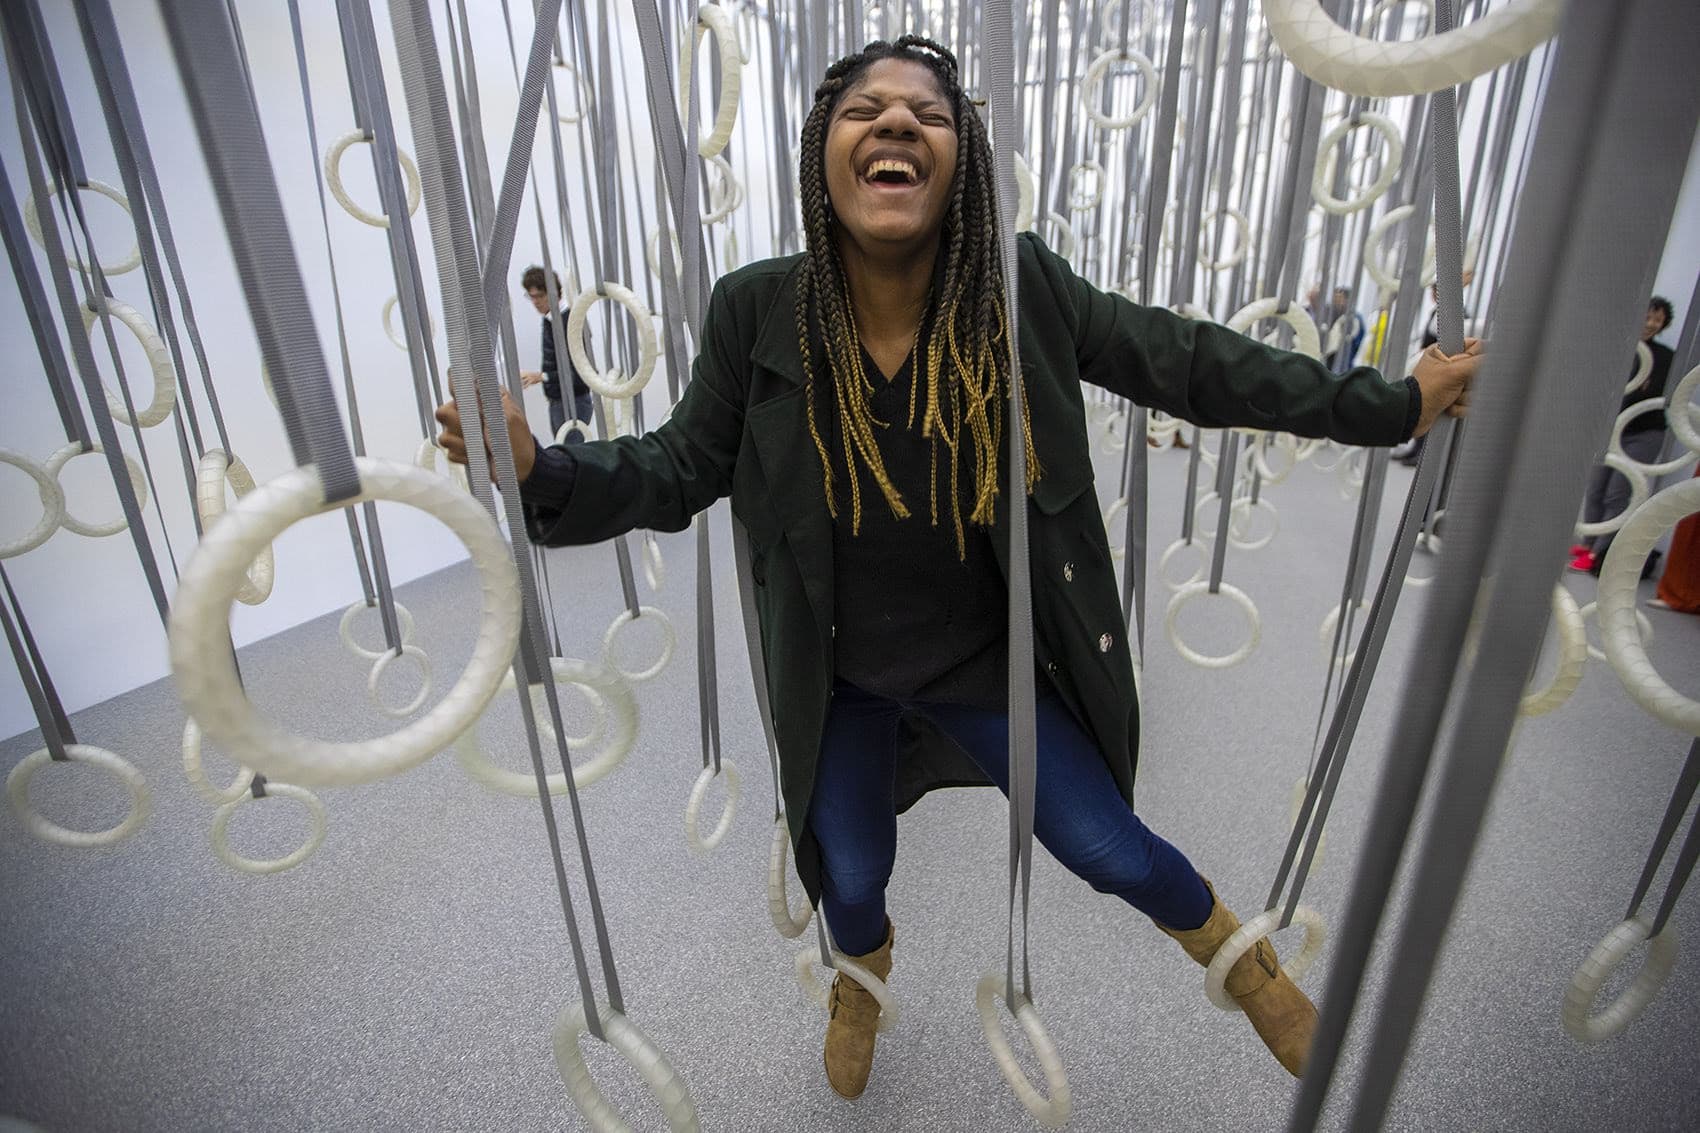 At the &quot;William Forsythe: Choreographic Objects&quot; exhibit at the ICA, Niya Doyle enjoys herself climbing through the installation ”The Fact of Matter,” where viewers are invited to traverse the space only using the dozens of rings suspended from the ceiling. (Jesse Costa/WBUR)